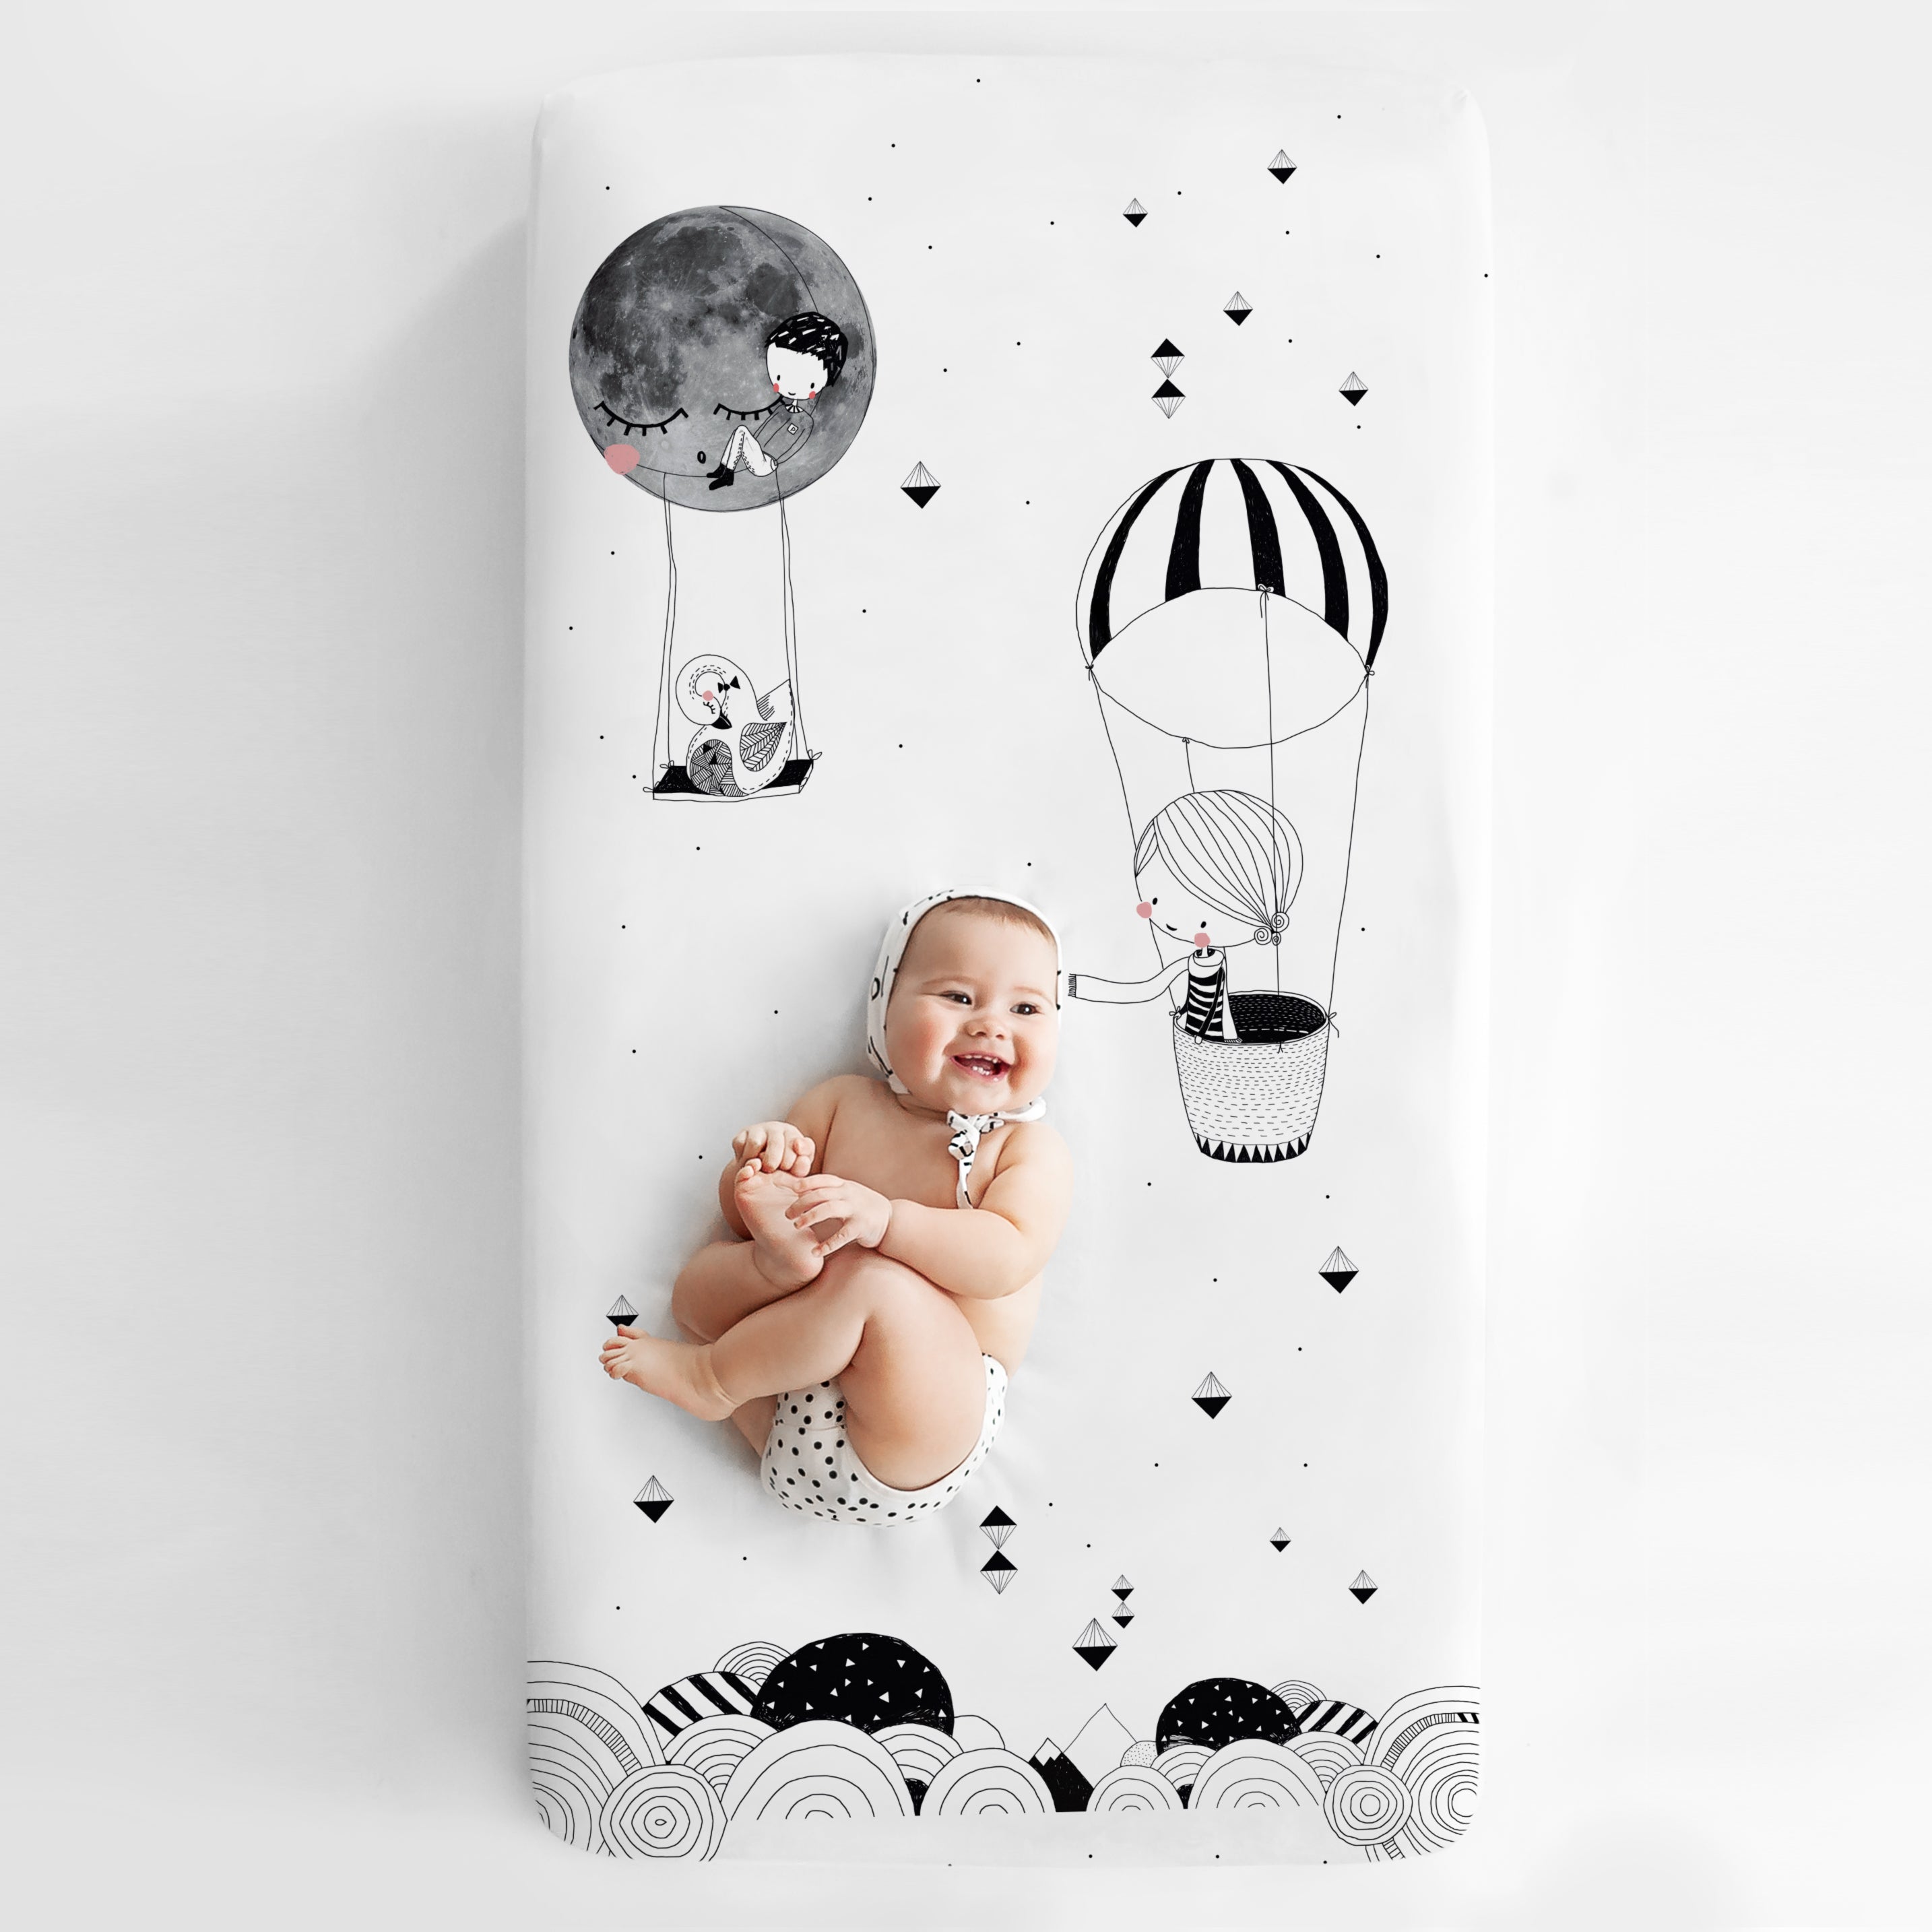 Fitted baby crib sheet by Rookie Humans, Frieda and the hot air balloon. Illustrated by Swanjte Hinrichsen. Designed for the modern nursery, packaged to make a unique baby shower gift. Monochrome nursery.